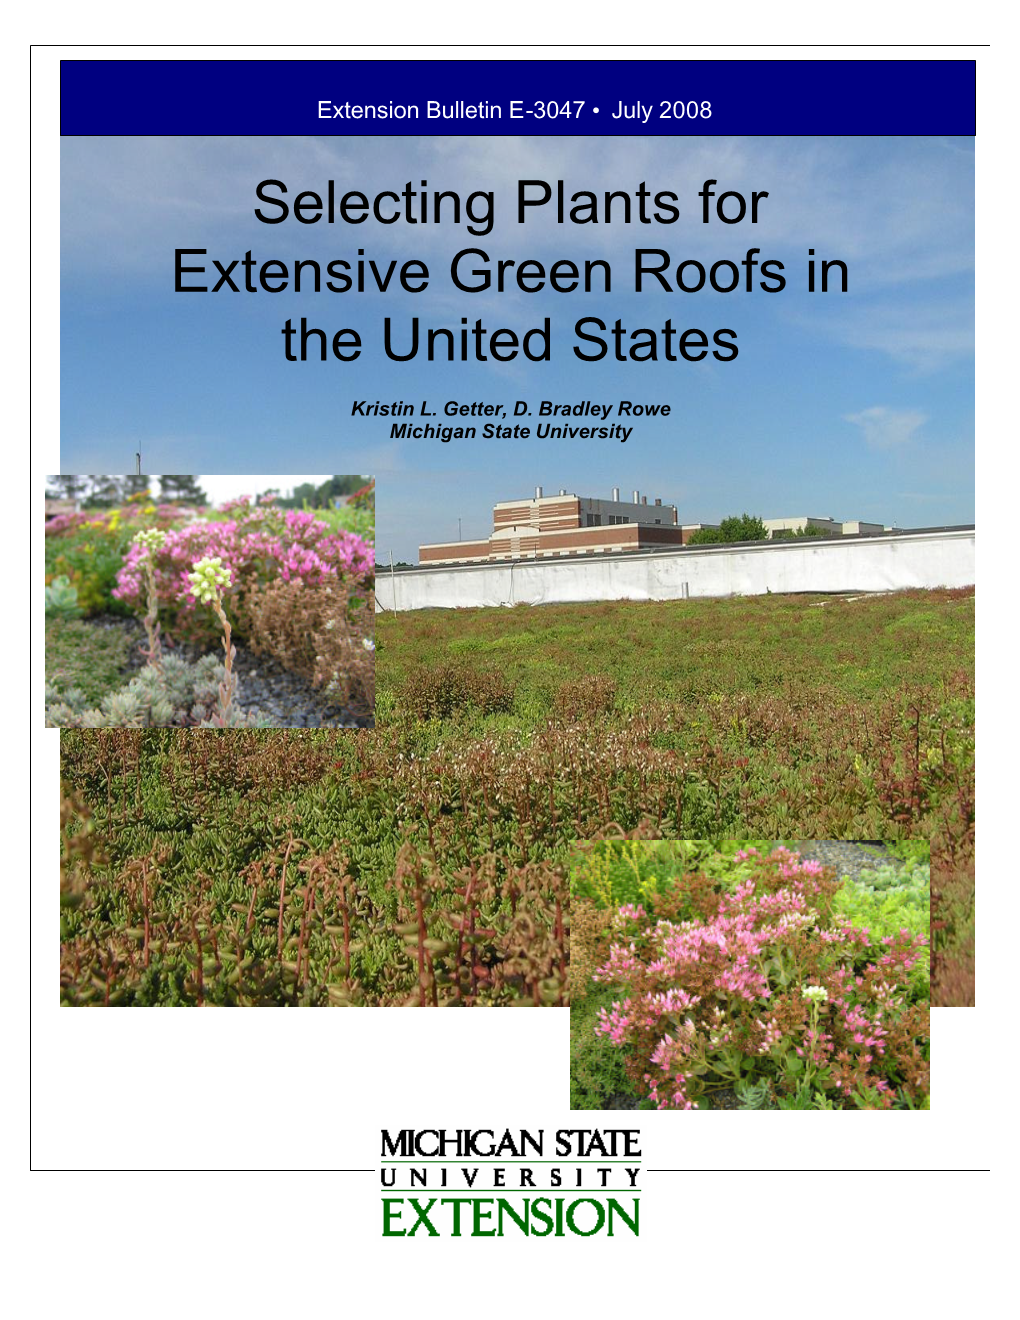 Selecting Plants for Extensive Green Roofs in the United States